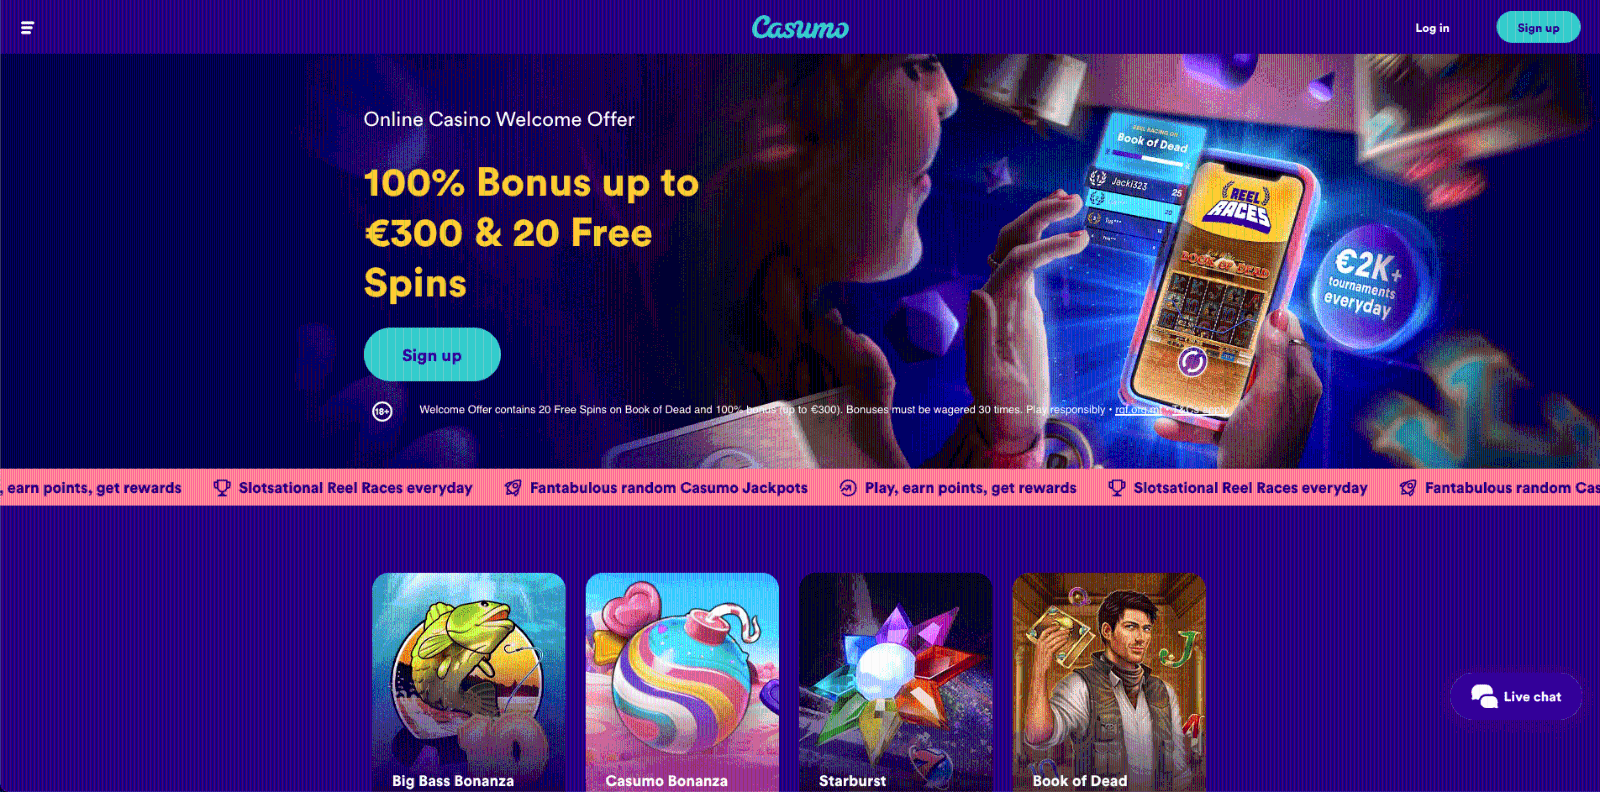 The appearance of the Casumo Casino website